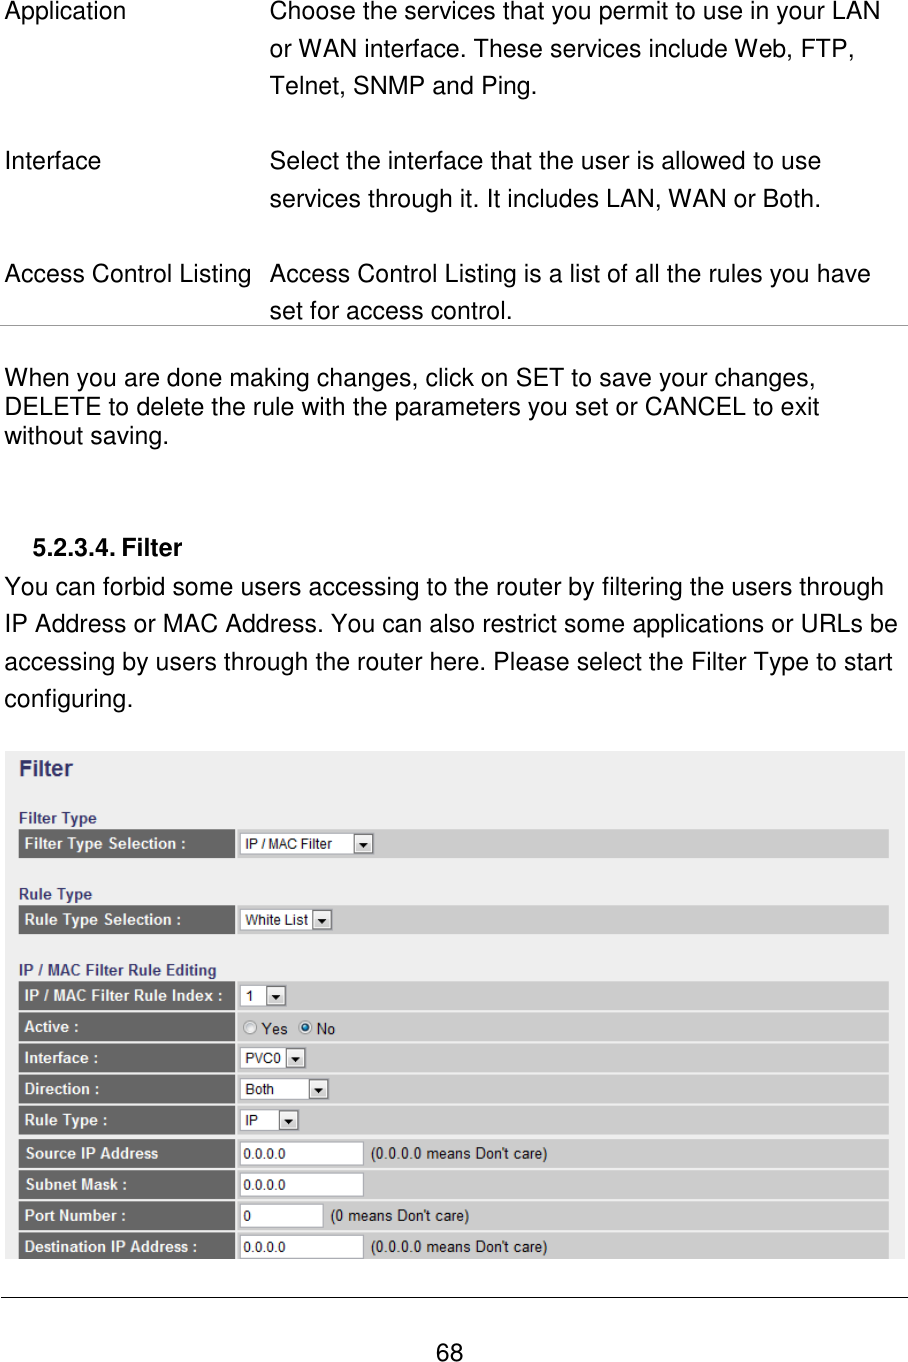   68   Application Choose the services that you permit to use in your LAN or WAN interface. These services include Web, FTP, Telnet, SNMP and Ping.    Interface Select the interface that the user is allowed to use services through it. It includes LAN, WAN or Both.   Access Control Listing Access Control Listing is a list of all the rules you have set for access control.  When you are done making changes, click on SET to save your changes, DELETE to delete the rule with the parameters you set or CANCEL to exit without saving.   5.2.3.4. Filter You can forbid some users accessing to the router by filtering the users through IP Address or MAC Address. You can also restrict some applications or URLs be accessing by users through the router here. Please select the Filter Type to start configuring.    